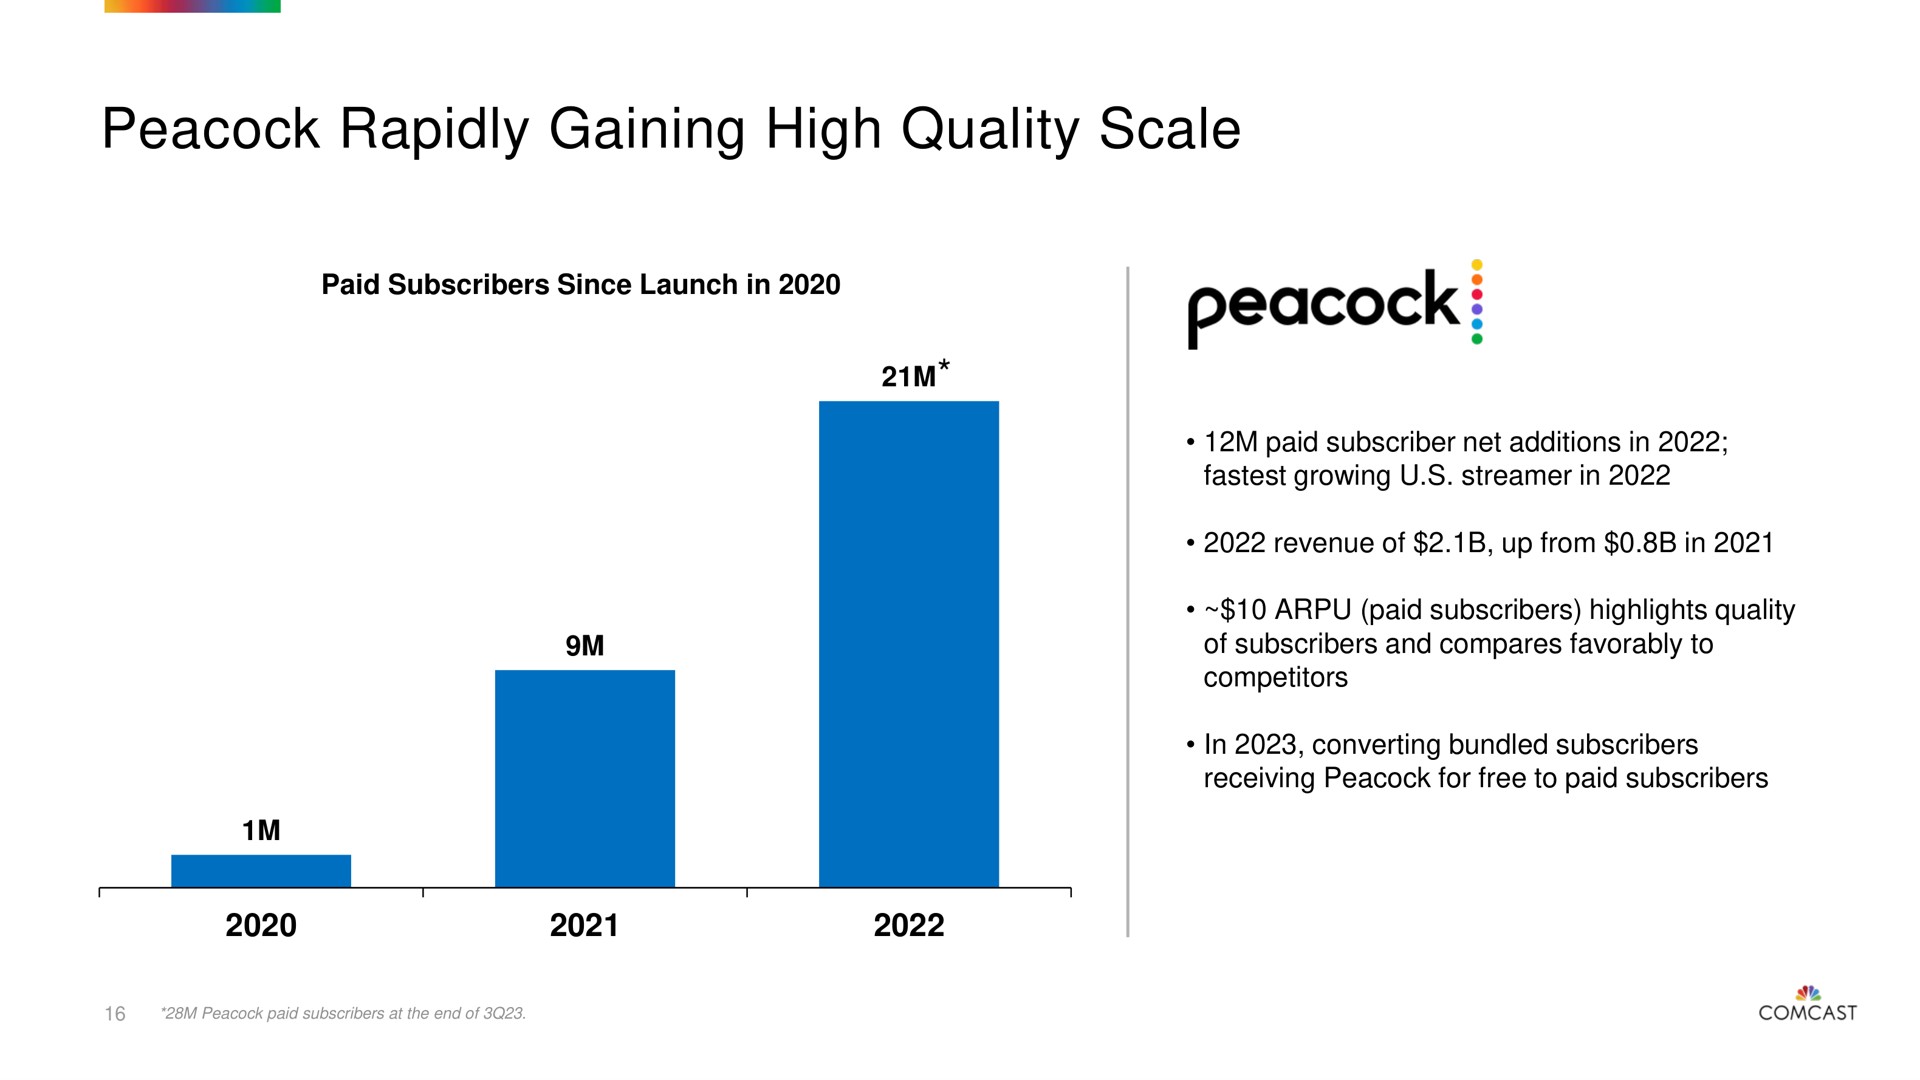 peacock rapidly gaining high quality scale | Comcast